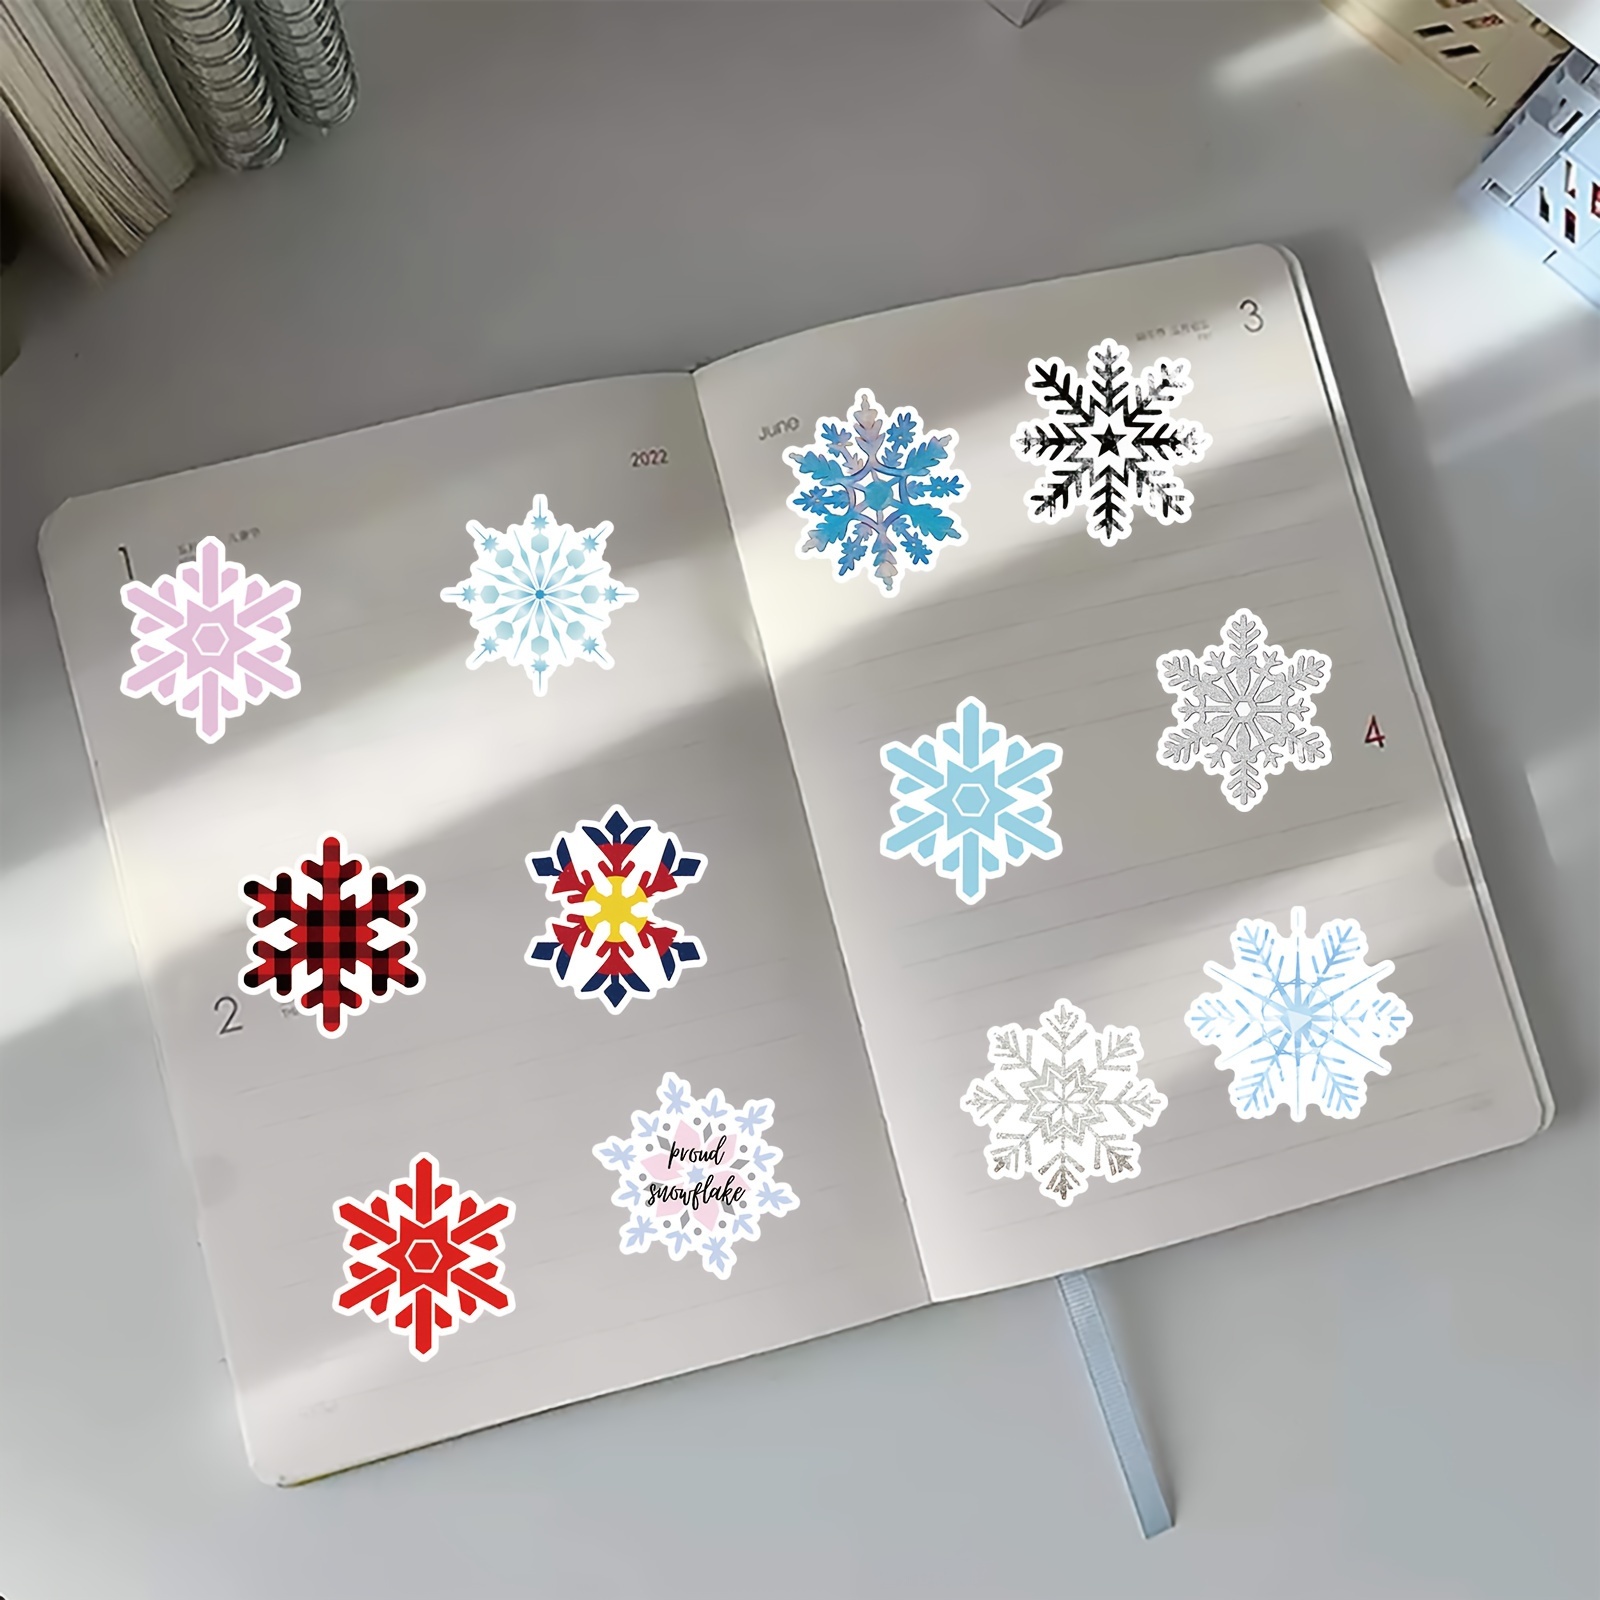  105 Large Pieces Blue, Silver And White Glitter Snowflake  Foam Stickers Christmas Hanukkah Crafts